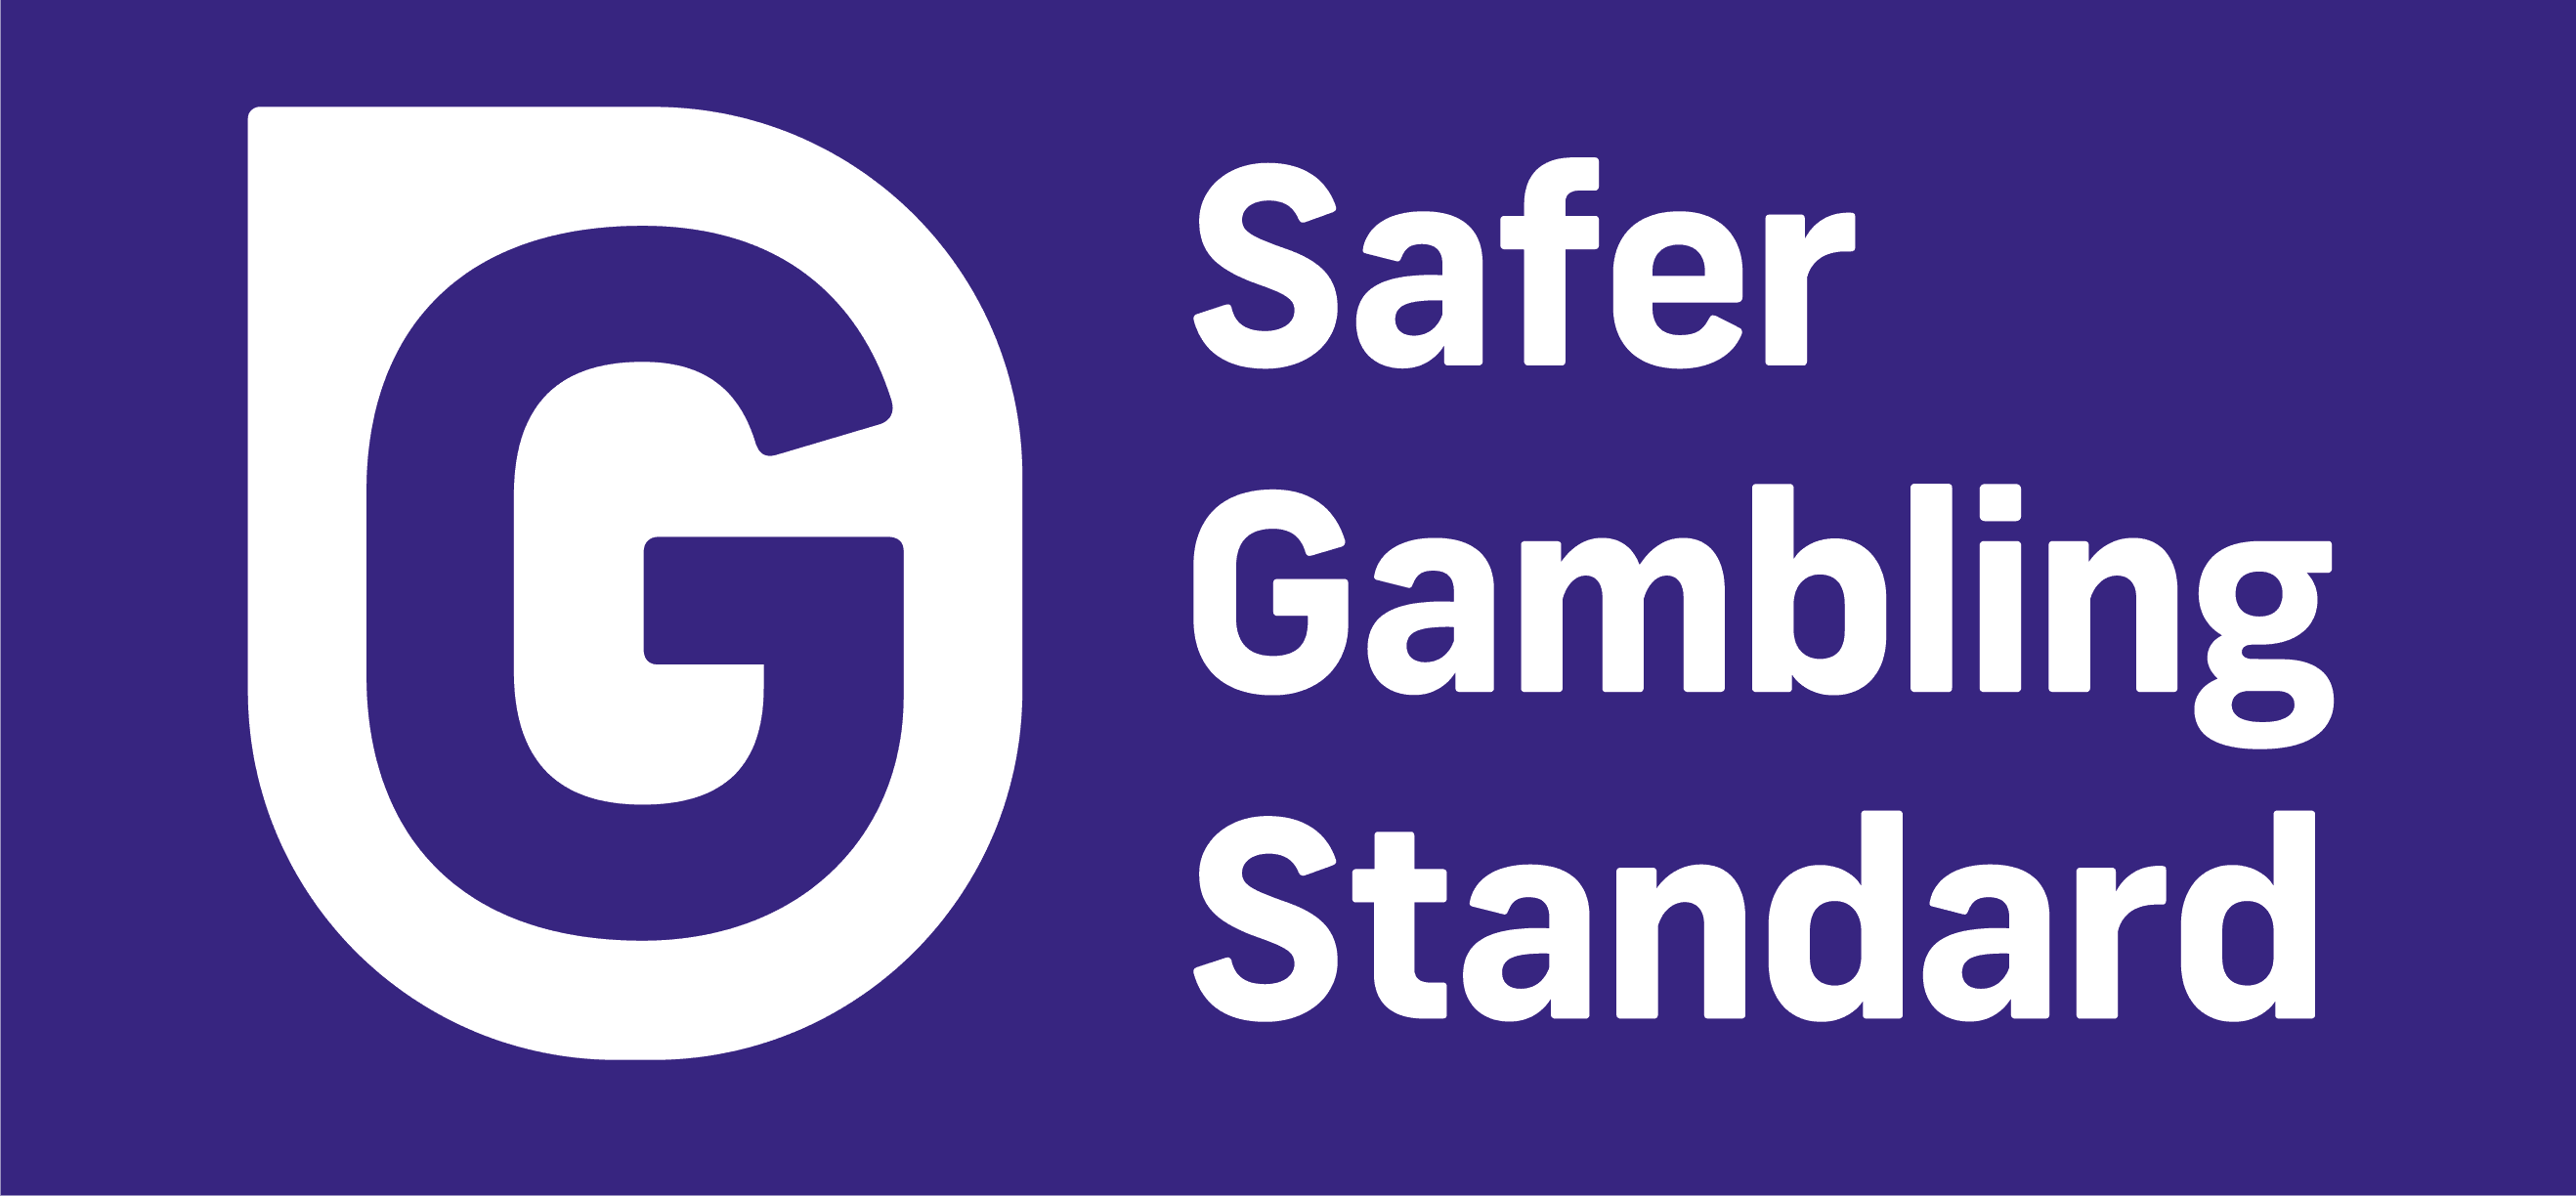 Gamcare Calls to Restructure the Safer Gambling Standard